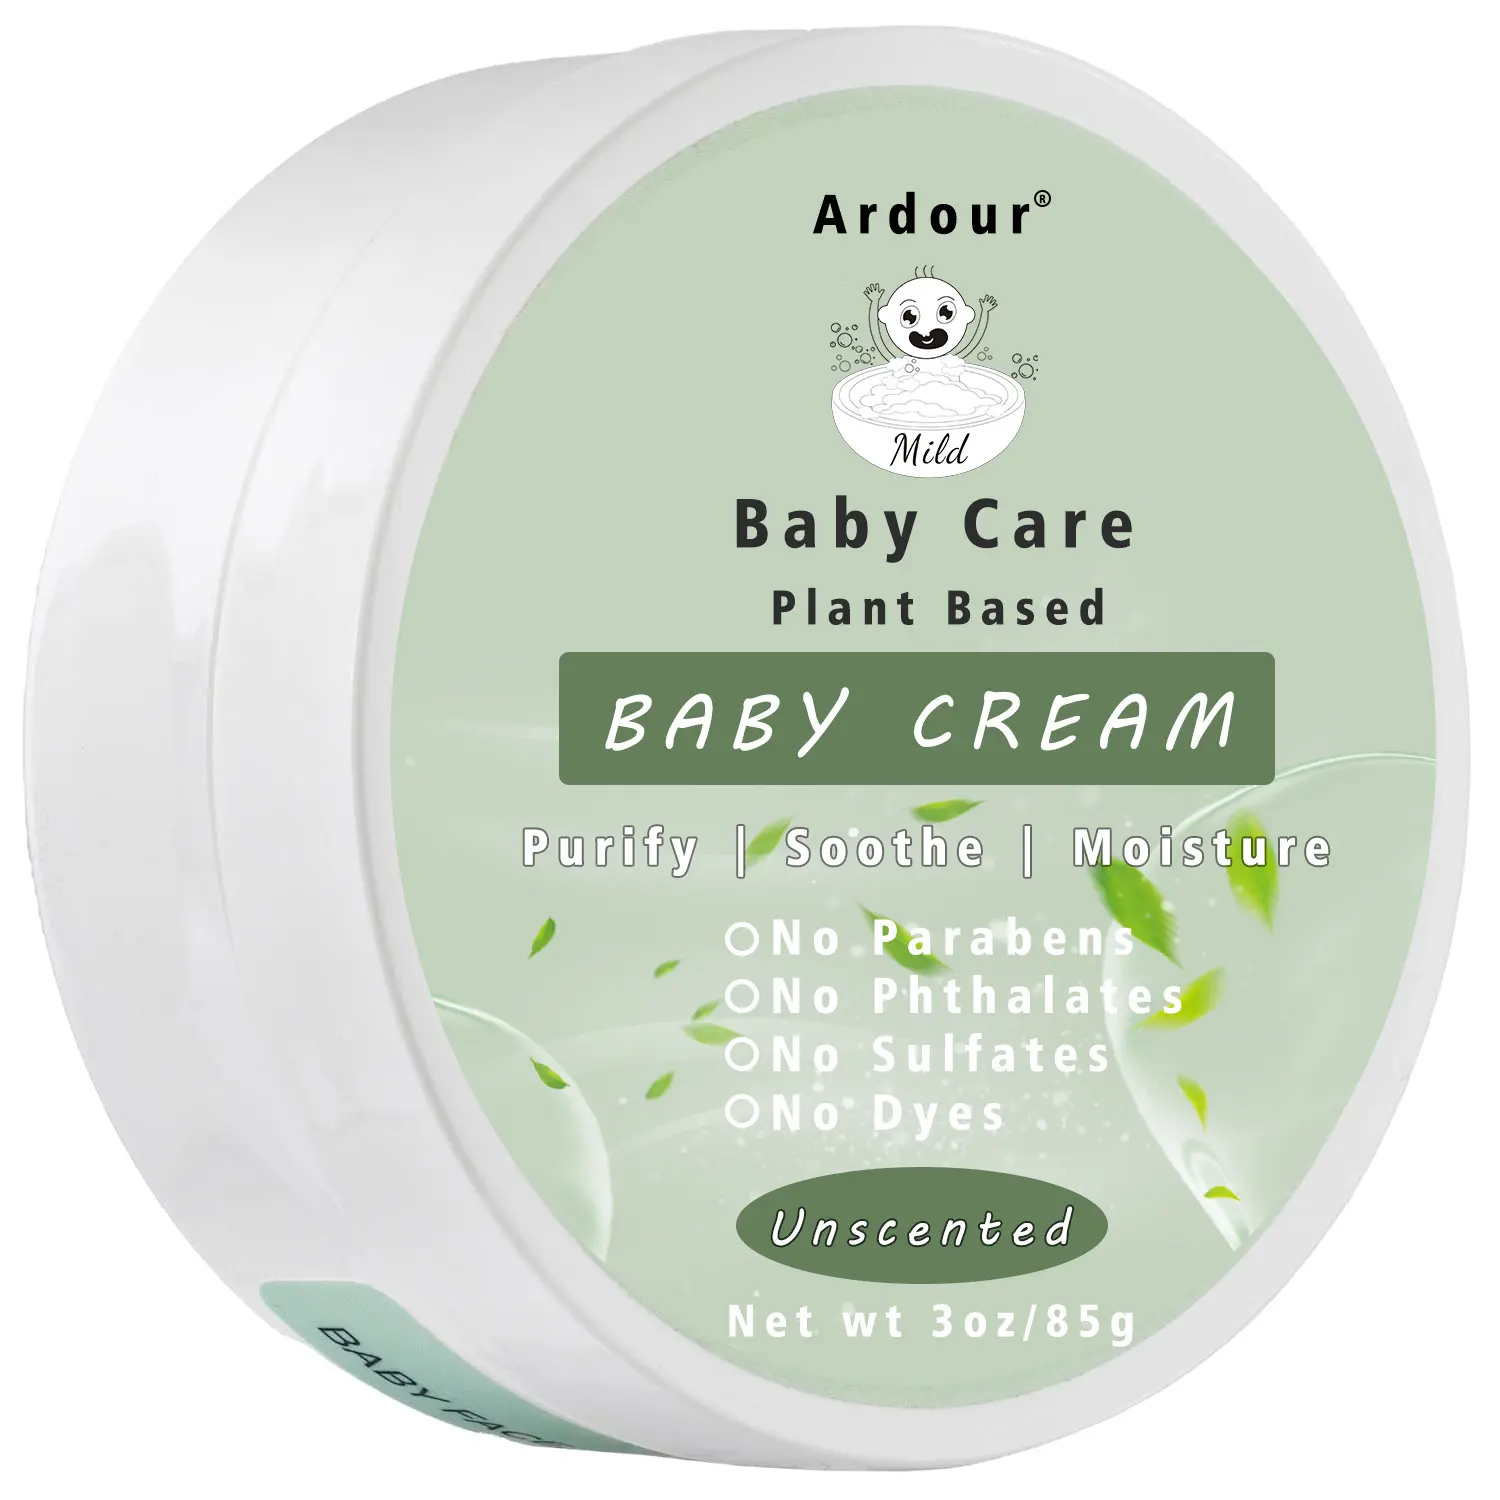 Unscented Baby Cream Lotion For Babies Kids Children Newborn Infants Gentle For Baby Body And Face Skin Care Butter Balm